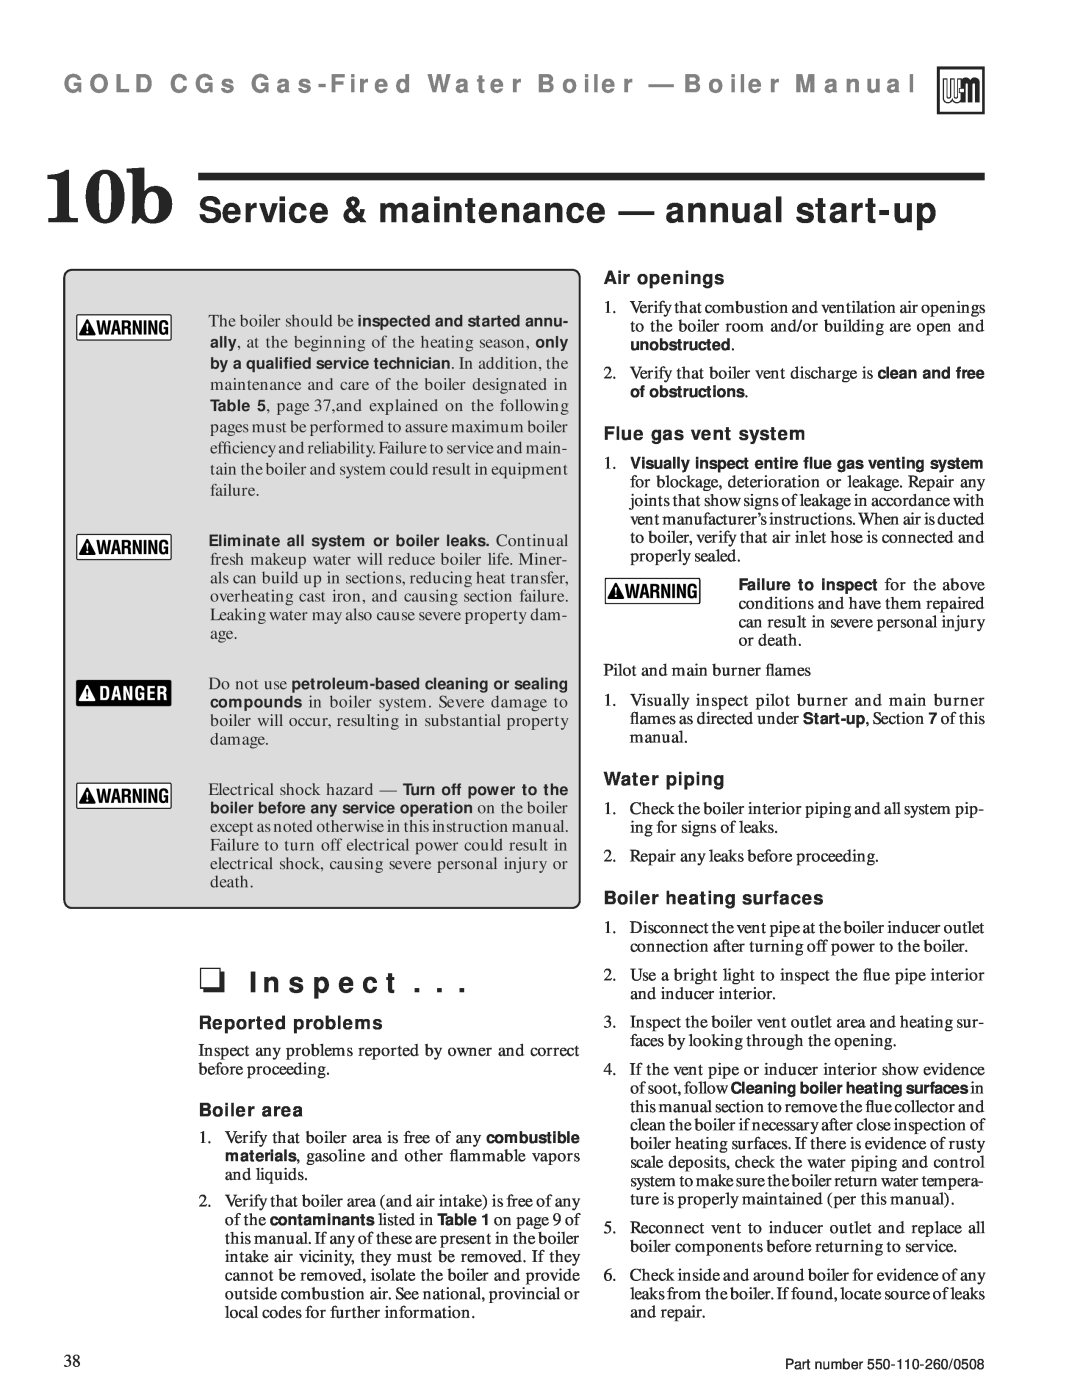 Weil-McLain 550-110-260/0508 manual 10b Service & maintenance - annual start-up, Inspect, Reported problems, Boiler area 